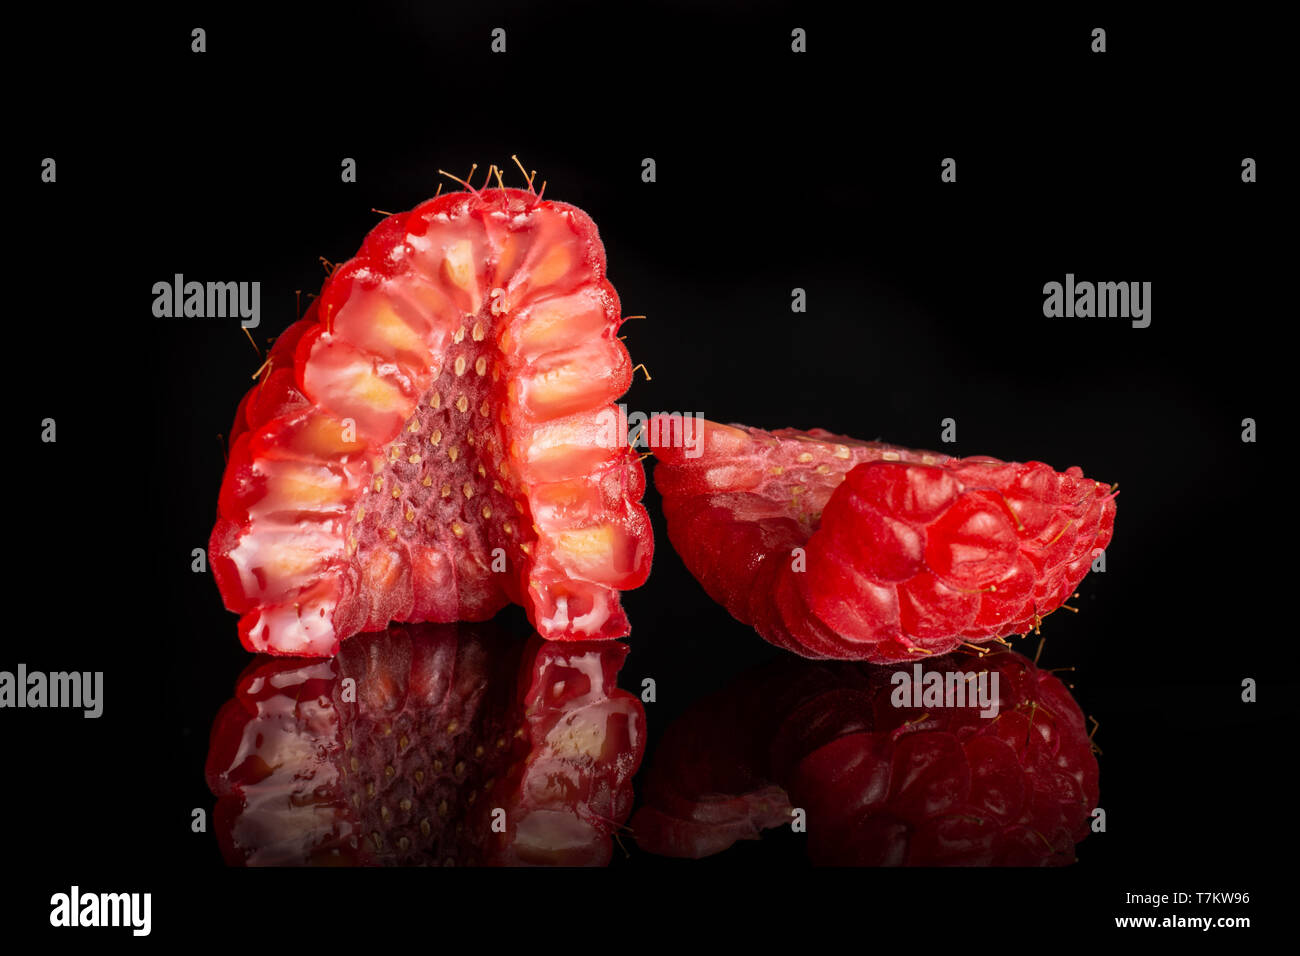 Group of two halves of fresh red raspberry one cut in a cross section isolated on black glass Stock Photo